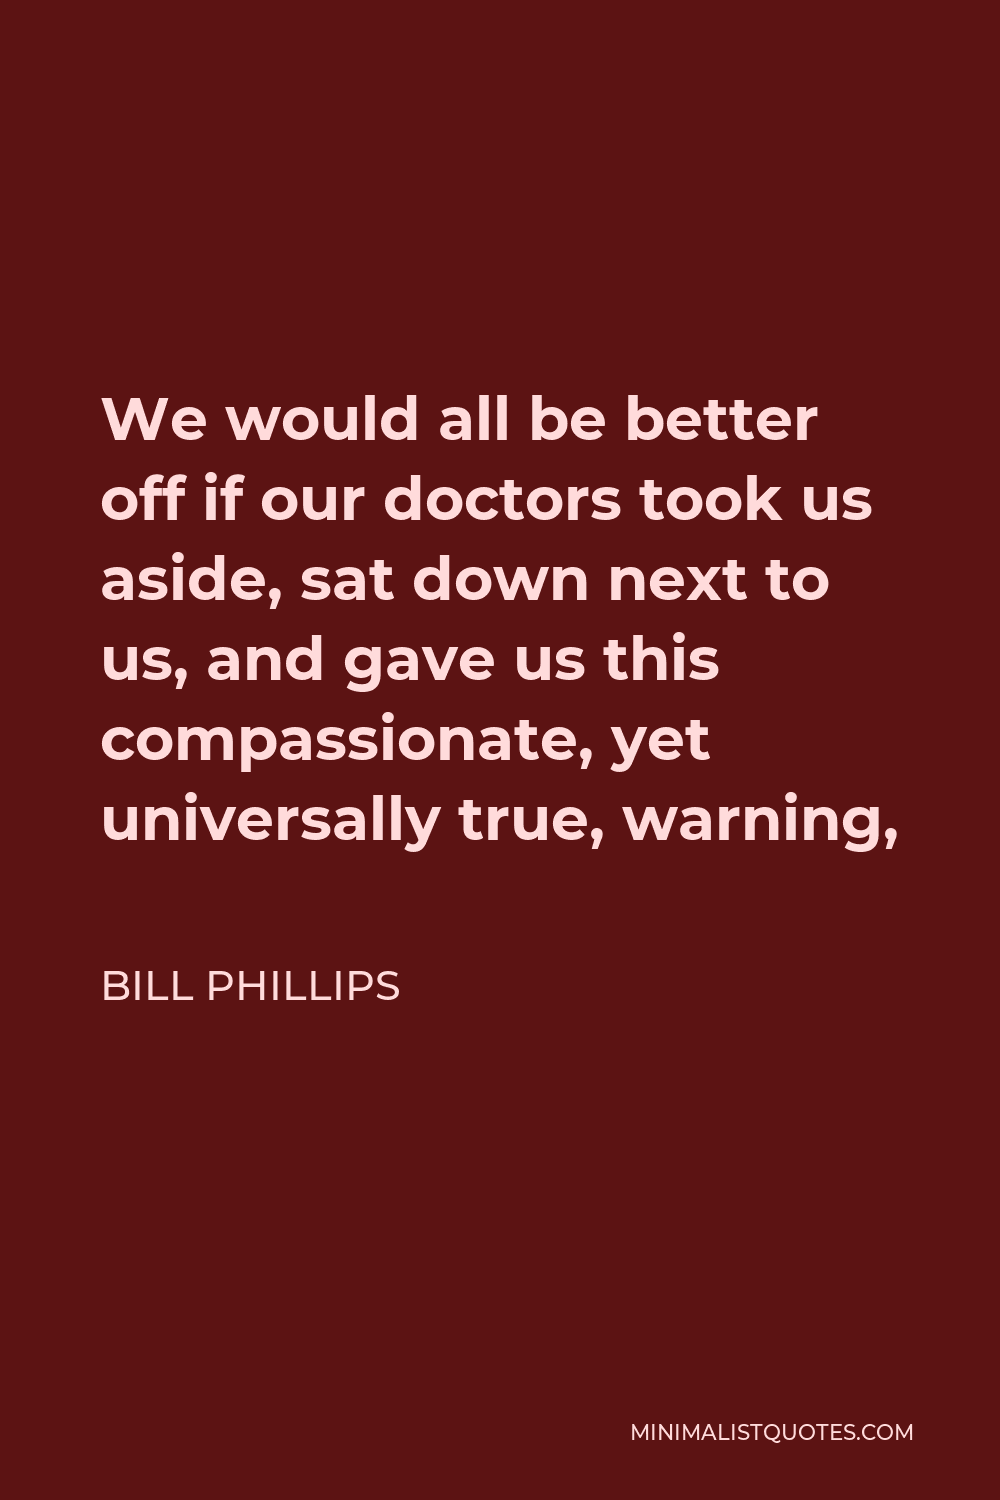 Bill Phillips Quote - We would all be better off if our doctors took us aside, sat down next to us, and gave us this compassionate, yet universally true, warning,